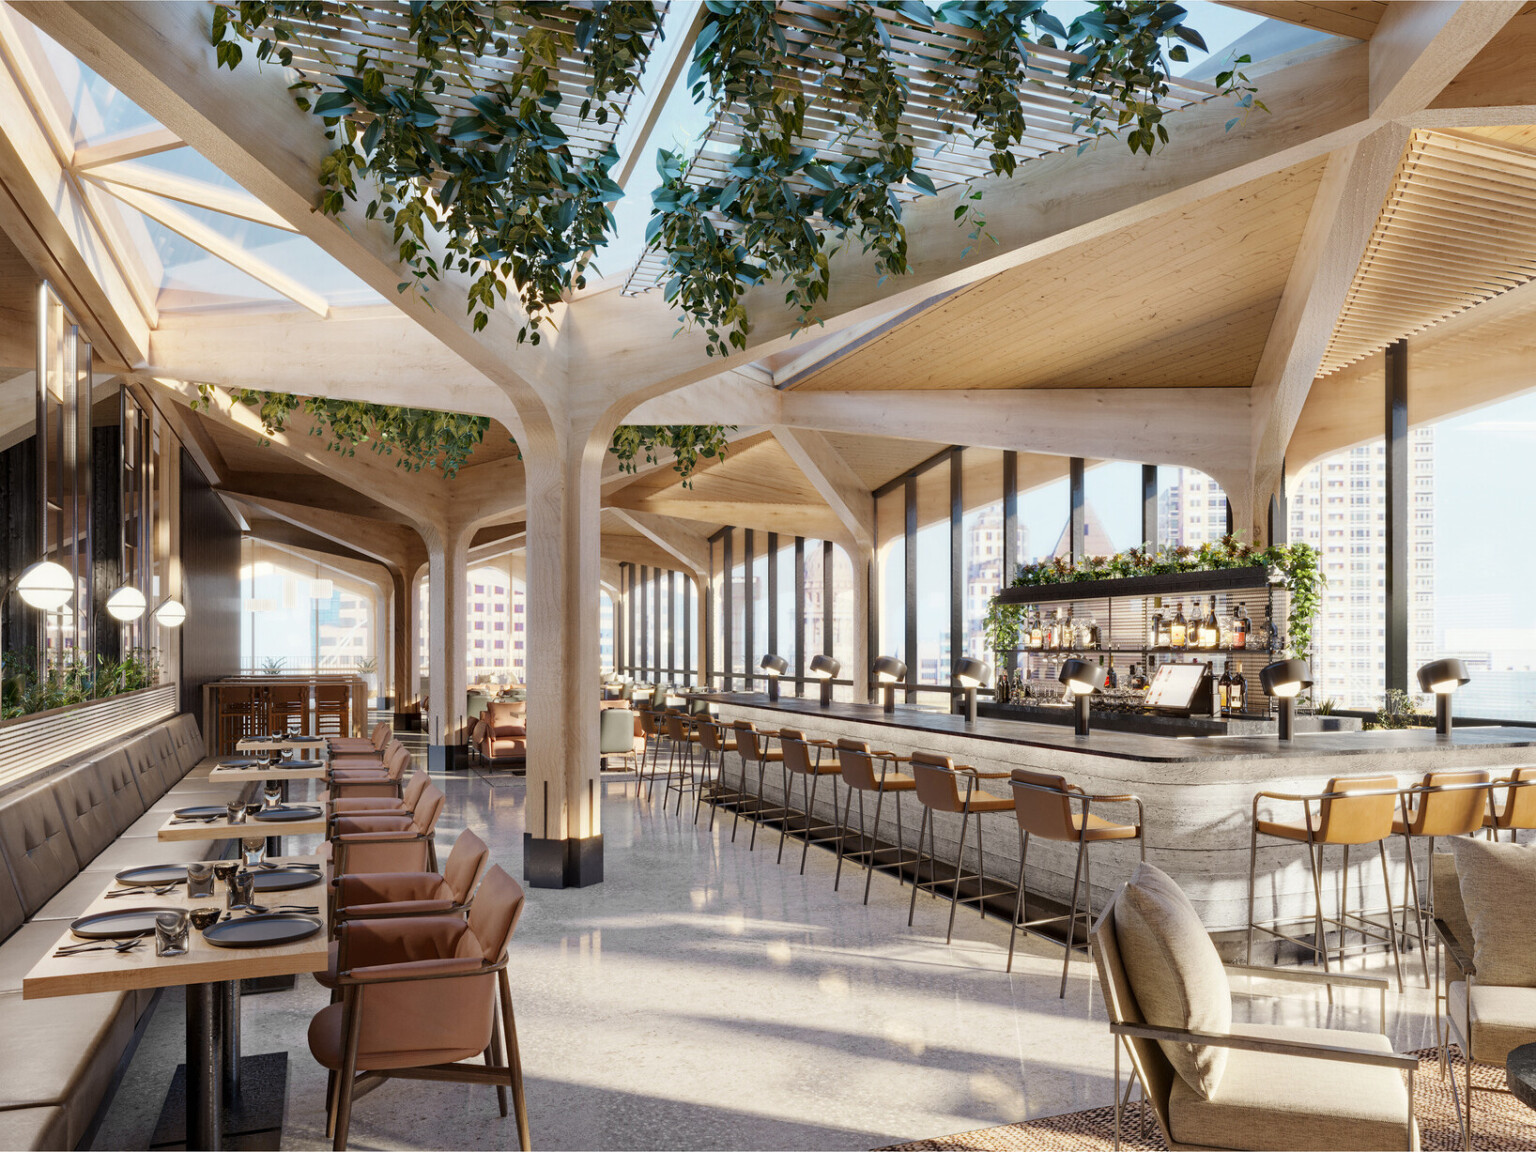 Mass timber hotel rendering. Dining space in restaurant with skylight views and geometric ceiling, green living wall ceiling